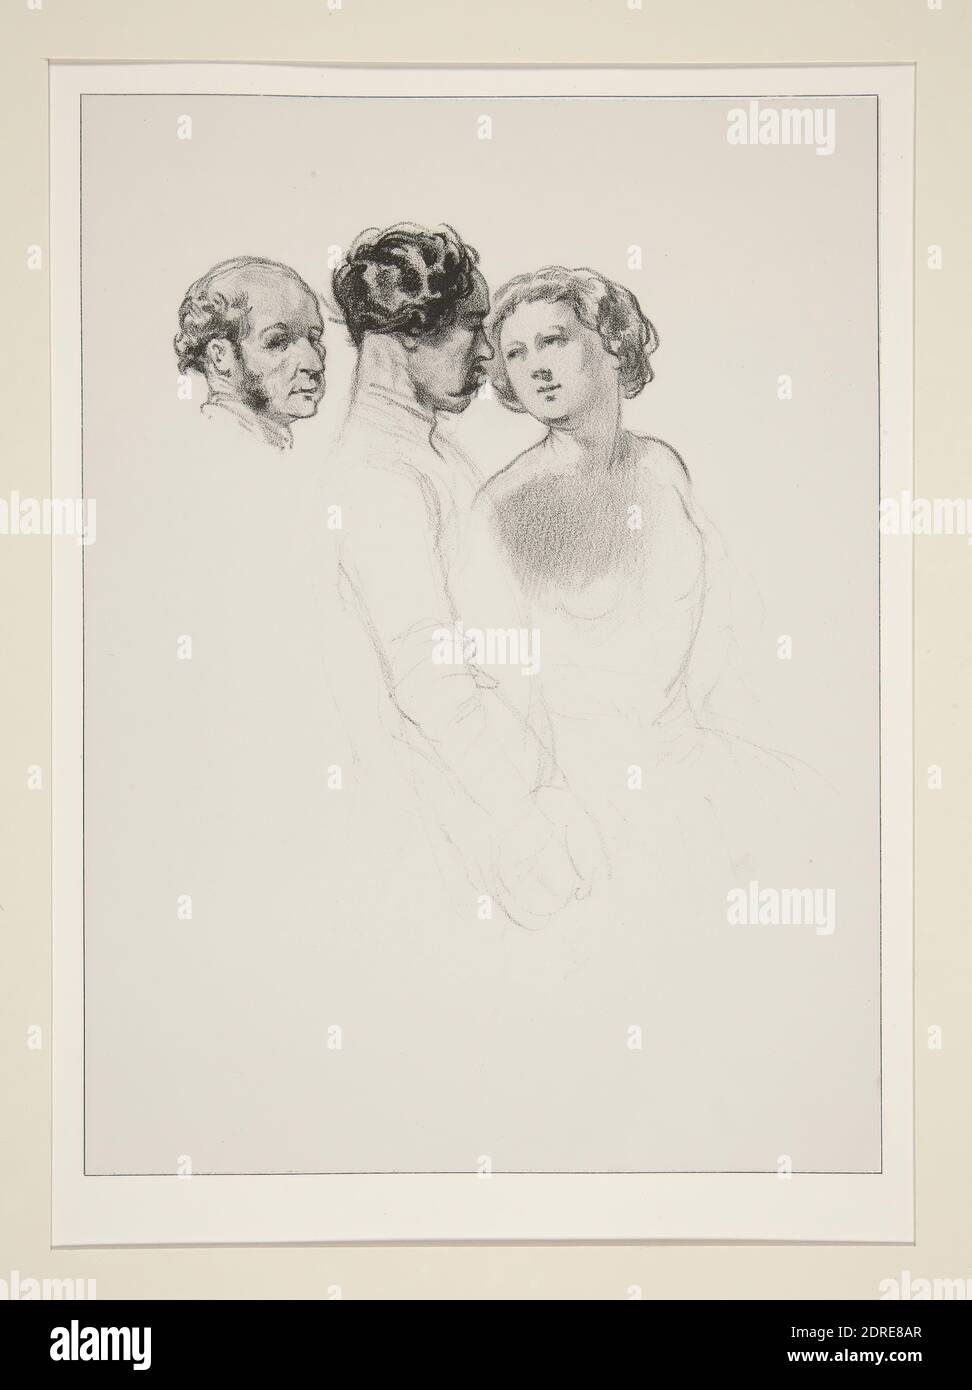 Artist: Paul Gavarni, French, 1804–1866, (GROUPE DE TROIS FIGURES.), Lithograph, French, 19th century, Works on Paper - Prints Stock Photo